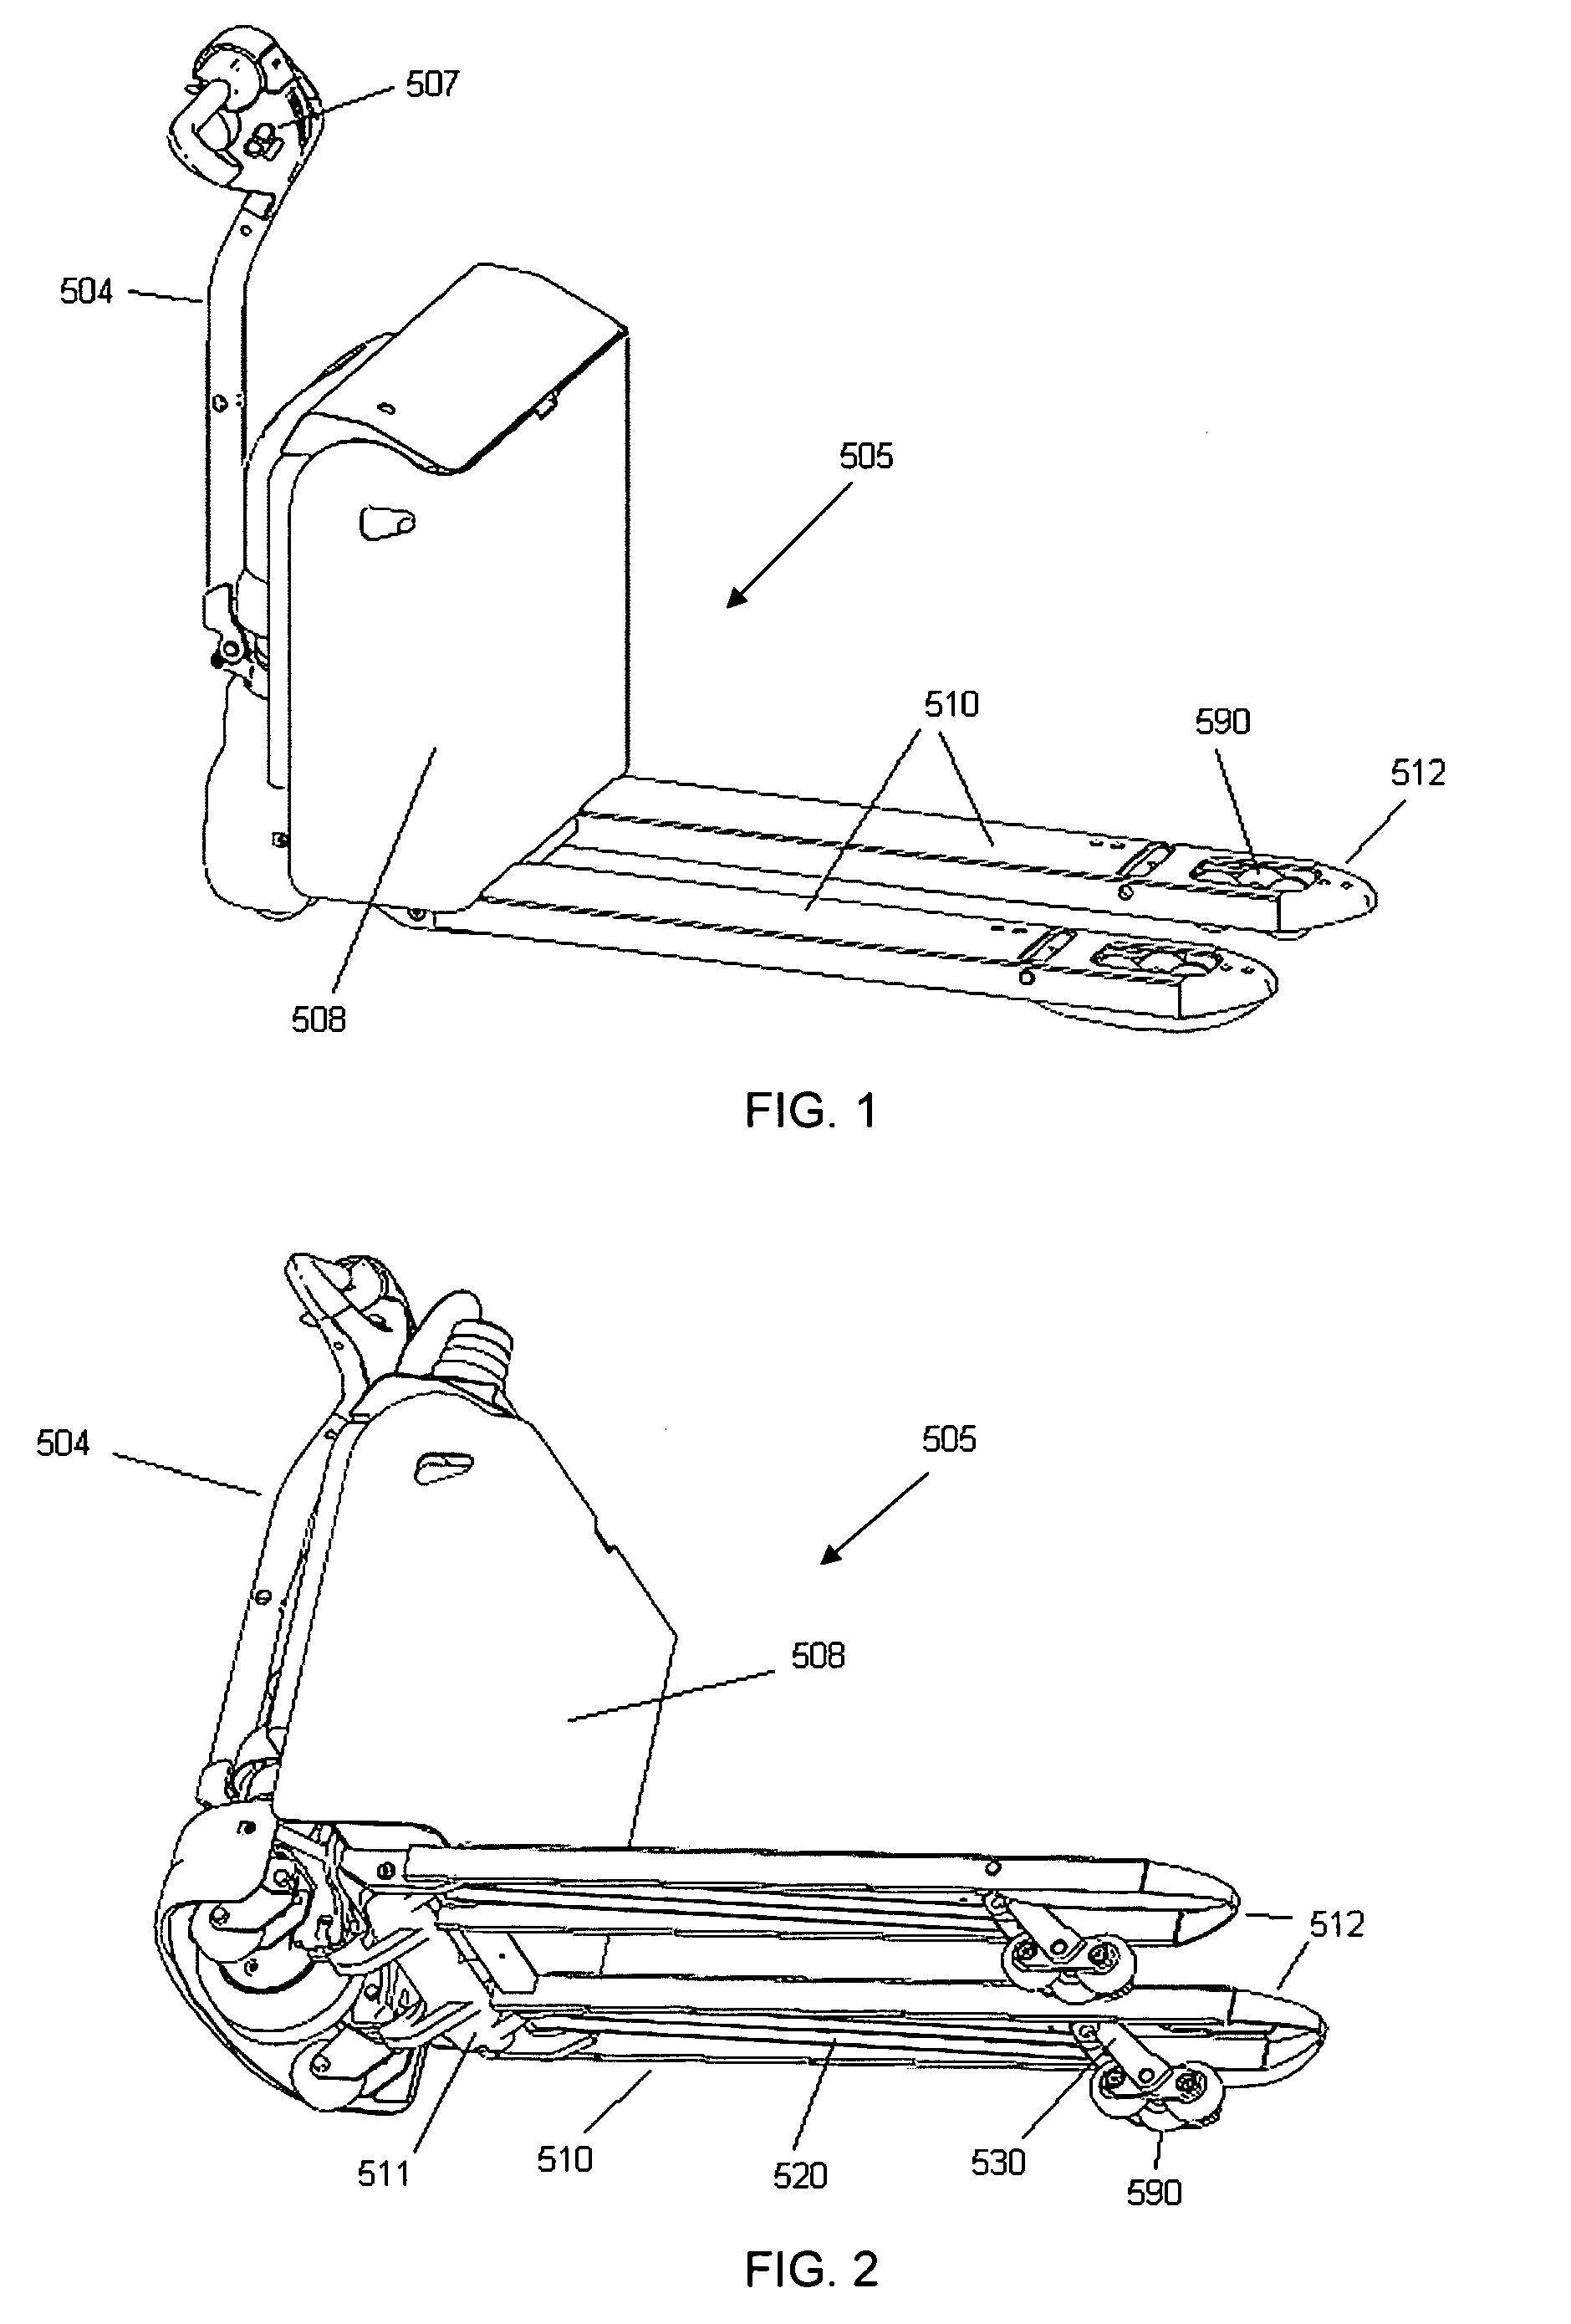 Multi-axis load rollers for an industrial vehicle